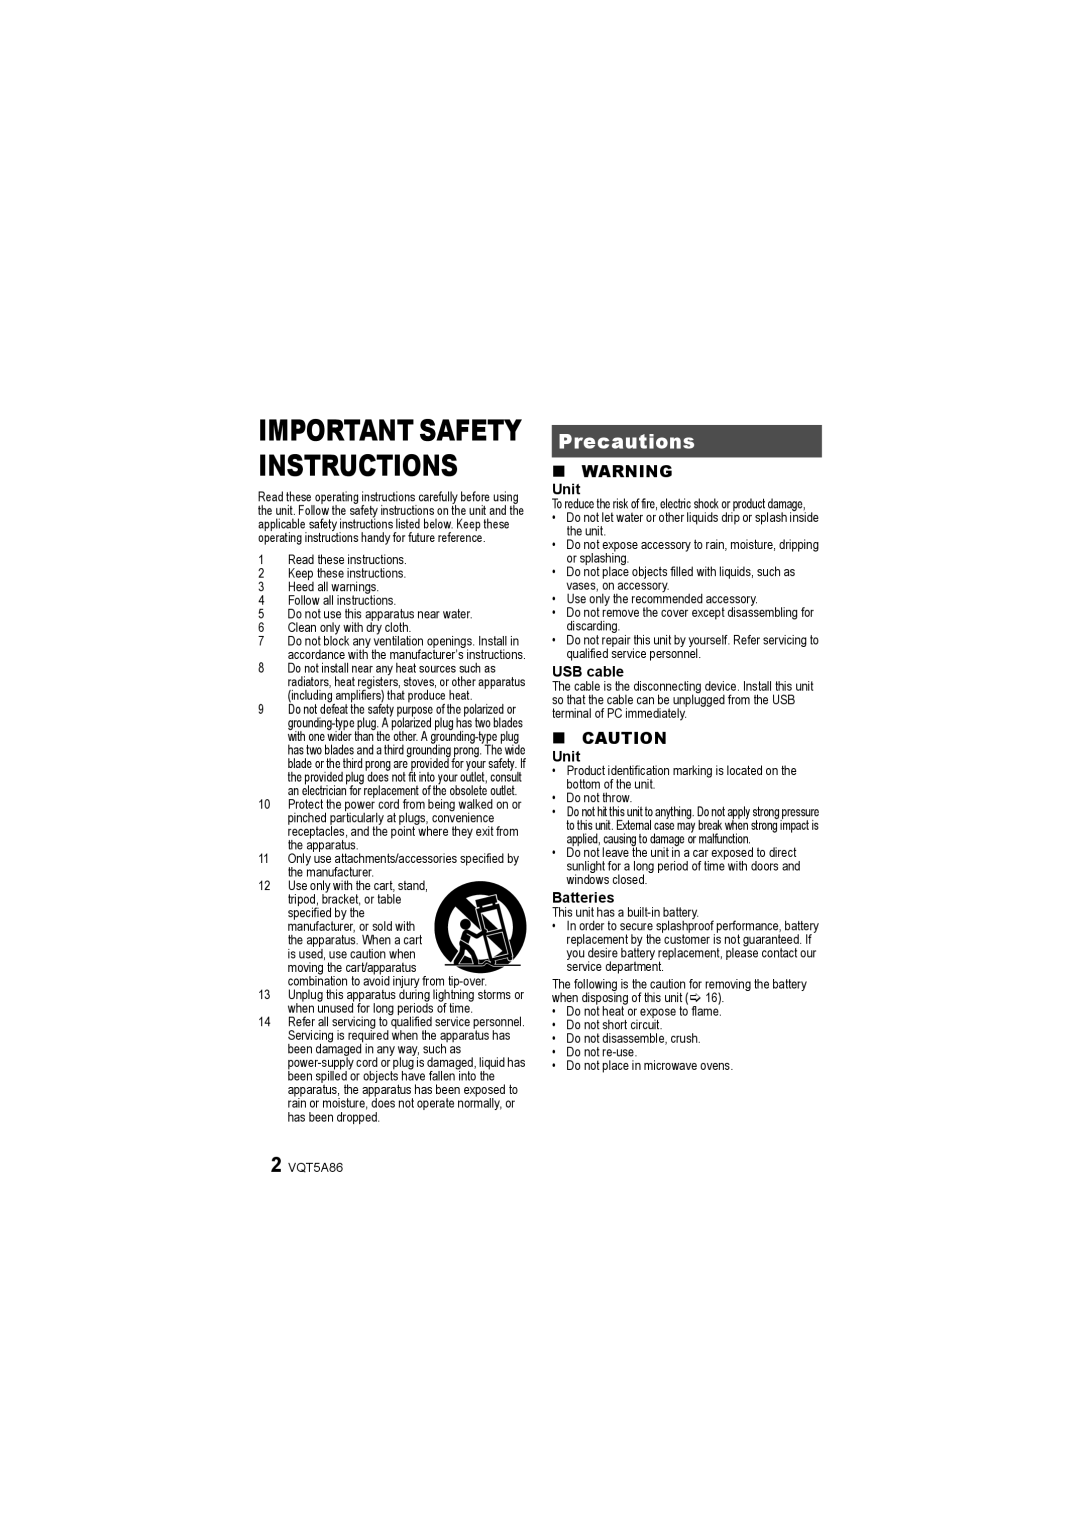 Panasonic SC-NT10 owner manual Precautions, Important Safety Instructions, Unit, USB cable, Batteries 